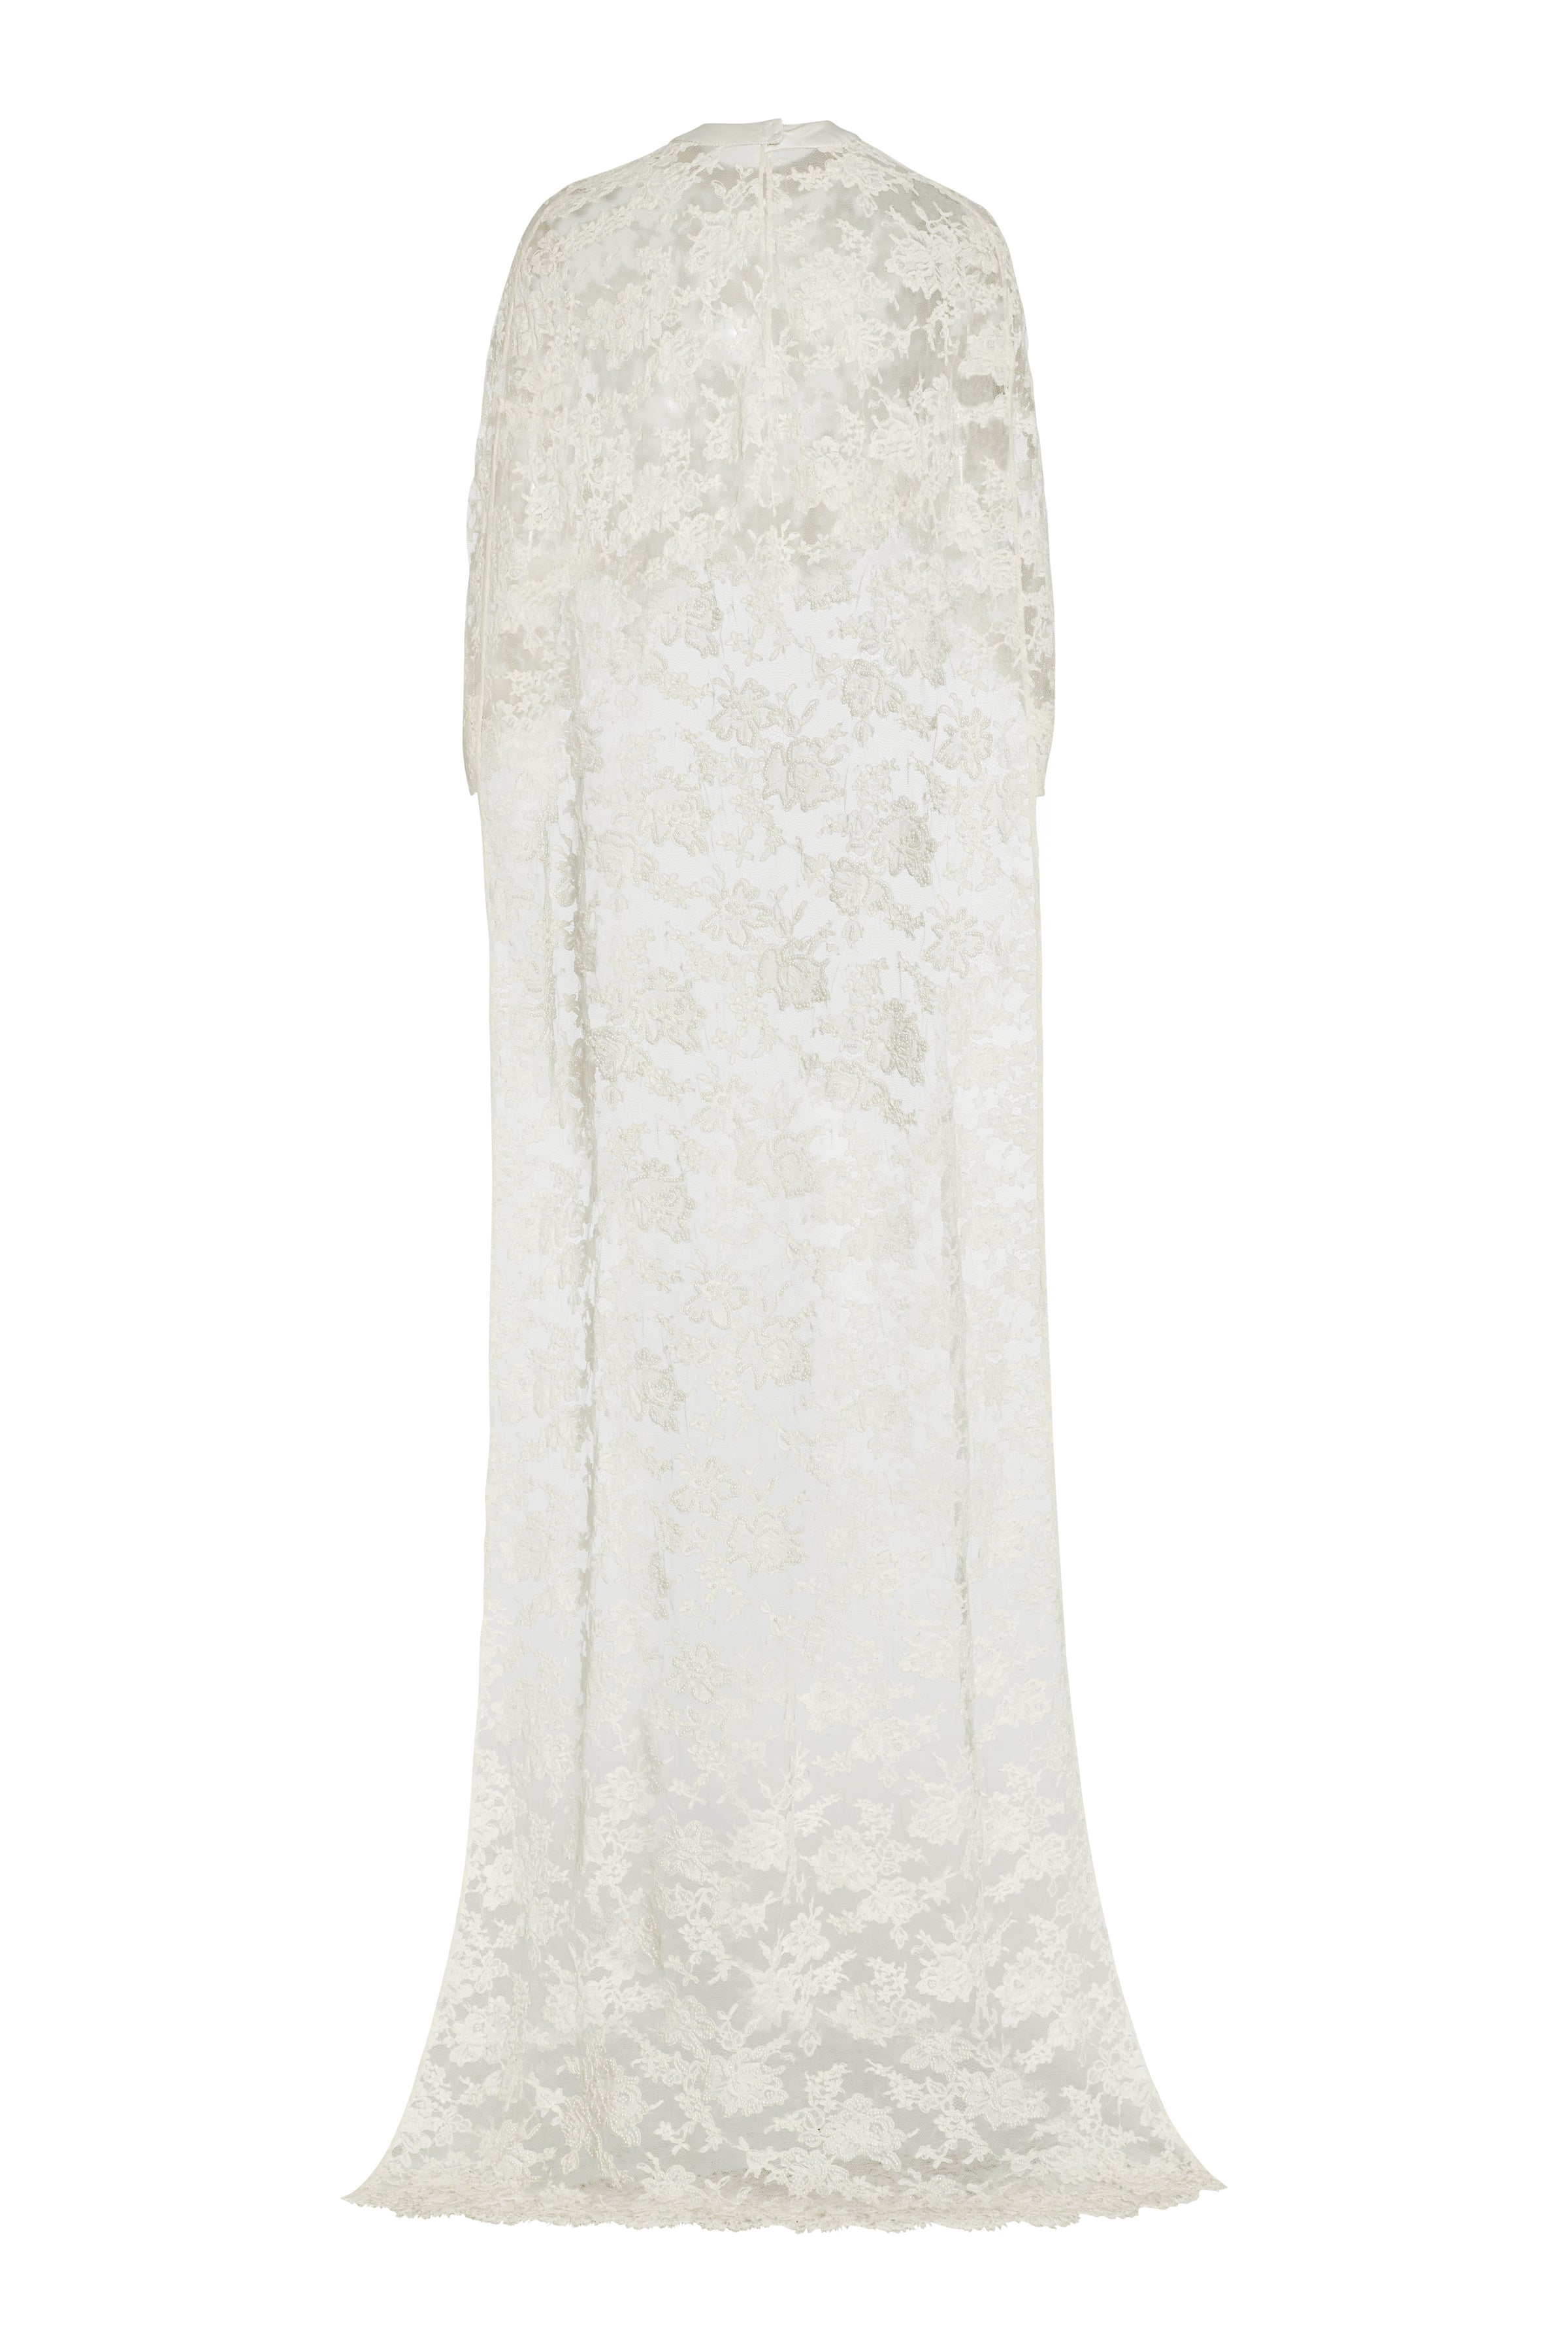 Garland Beaded White Lace Cape with Scalloped Hem